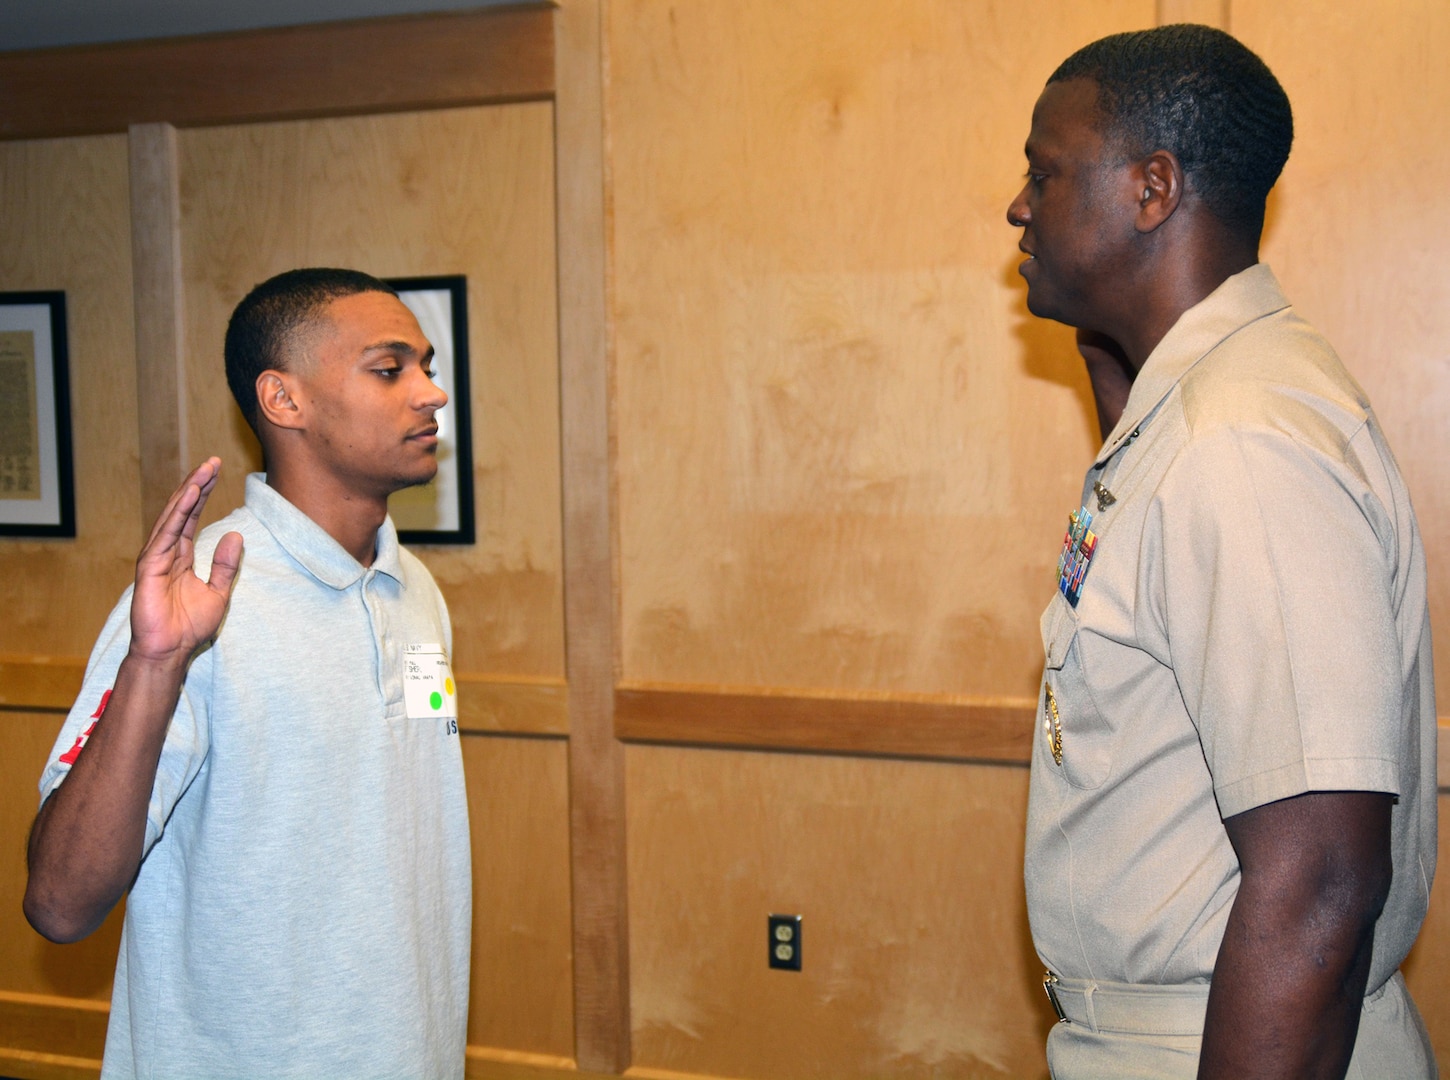 Reginal A. Fisher Jr. (left) , a 2016 graduate of Allison Steele High School in Cibolo, Texas, enlisted into the U.S. Navy as a hospital corpsman at the San Antonio Military Entrance Processing Station at Joint Base San Antonio-Fort Sam Houston.  His father, Lt. Reginal A. Fisher Sr., a native of Longview, Texas, and the enlisted operations officer for Navy Recruiting District San Antonio, administered the Oath of Enlistment.  Future Sailor Fisher will become the fifth generation serviceman in his family.  His great-great grandfather, Pfc. Tinzer Morrow, served in the Army during WWI; his great grandfather, Cpl. Willie Lee Fisher, served in the Army Air Corps in WWII; his grandfather, Cpl. James Lewis Fisher, served in the Army during the Vietnam War; and his father, who served in OPERATION IQAQI FREEDOM/ENDURRING FREEDOM. 